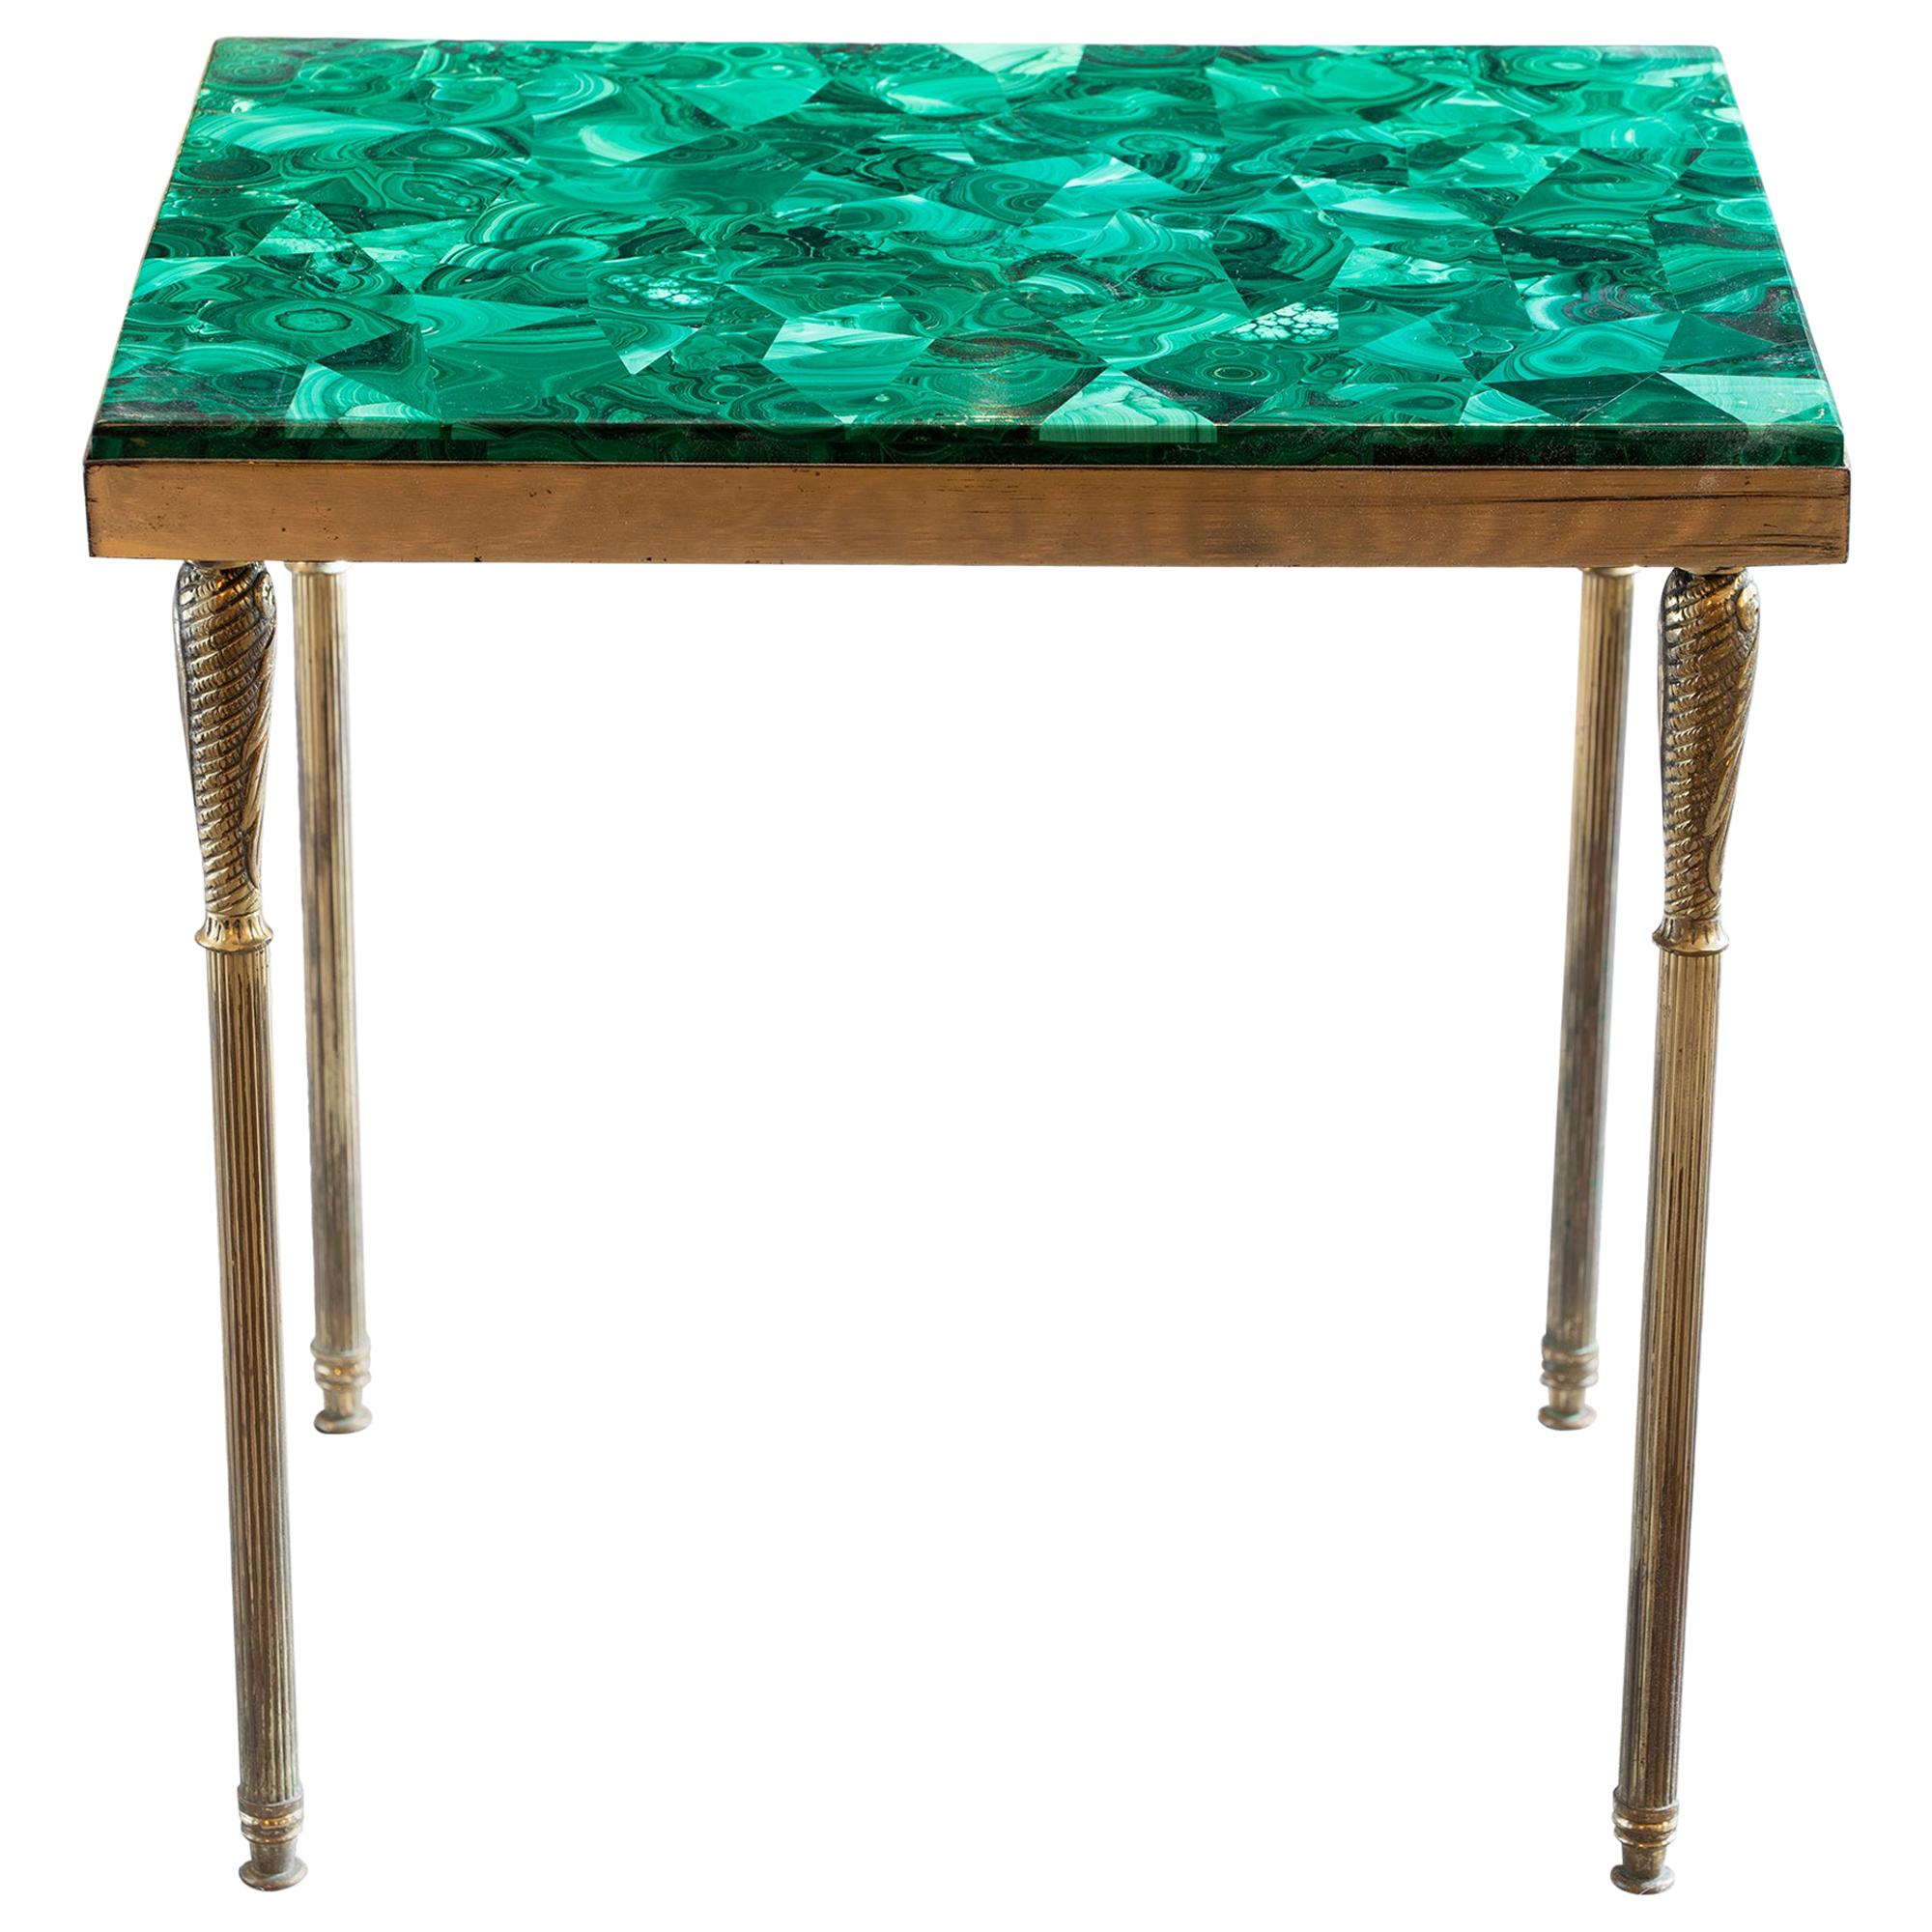 1960s Italian Malachite and Brass Occasional Side Table